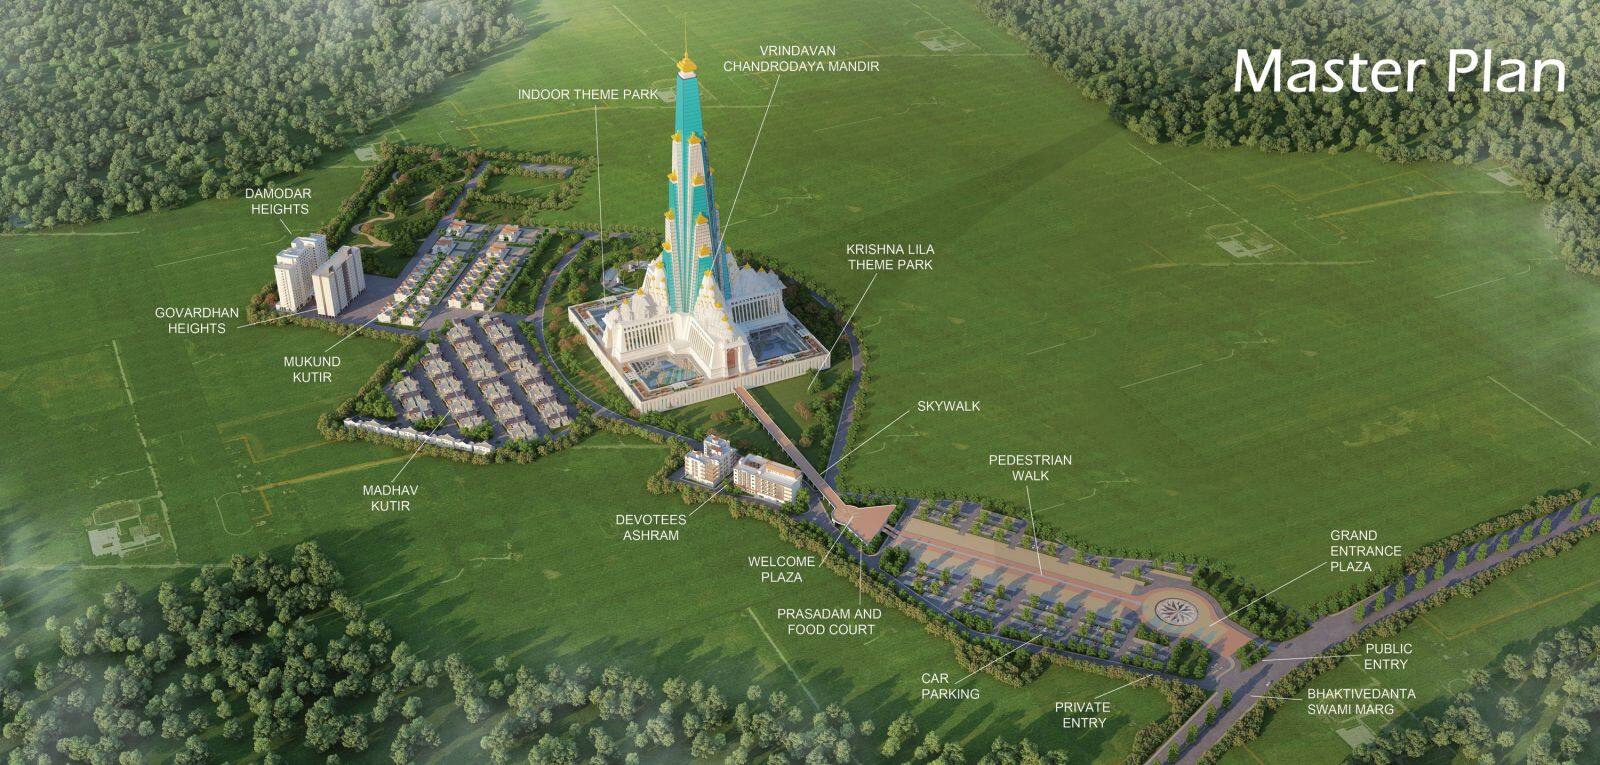 Theme park 12 forests planned at worlds tallest temple